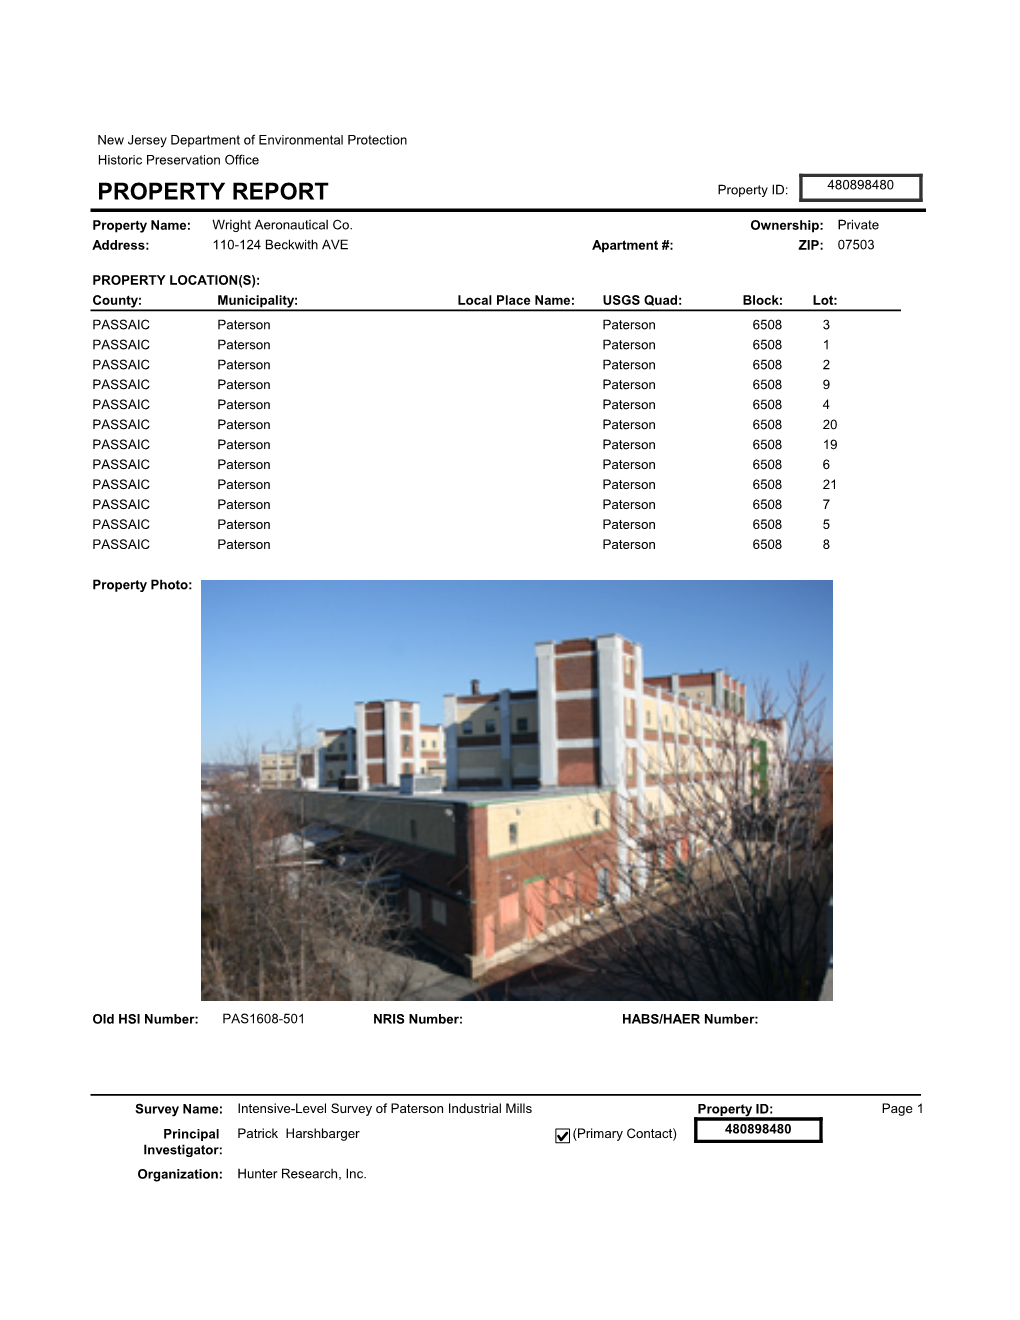 PROPERTY REPORT Property ID: 480898480